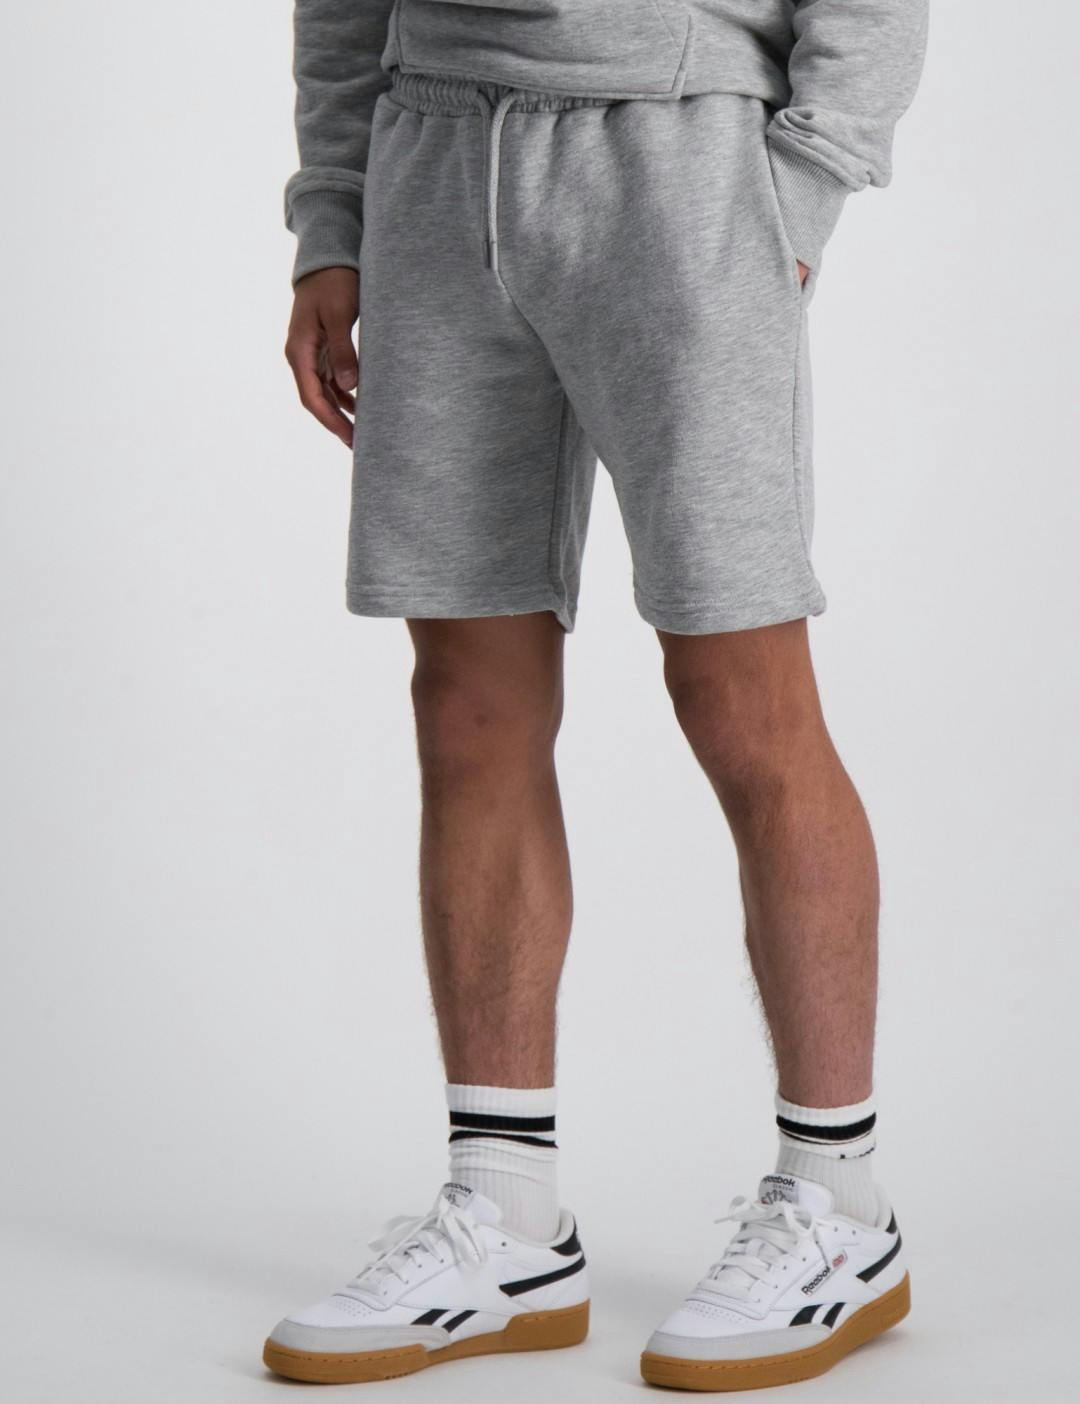 OUR Sven Sweat Shorts